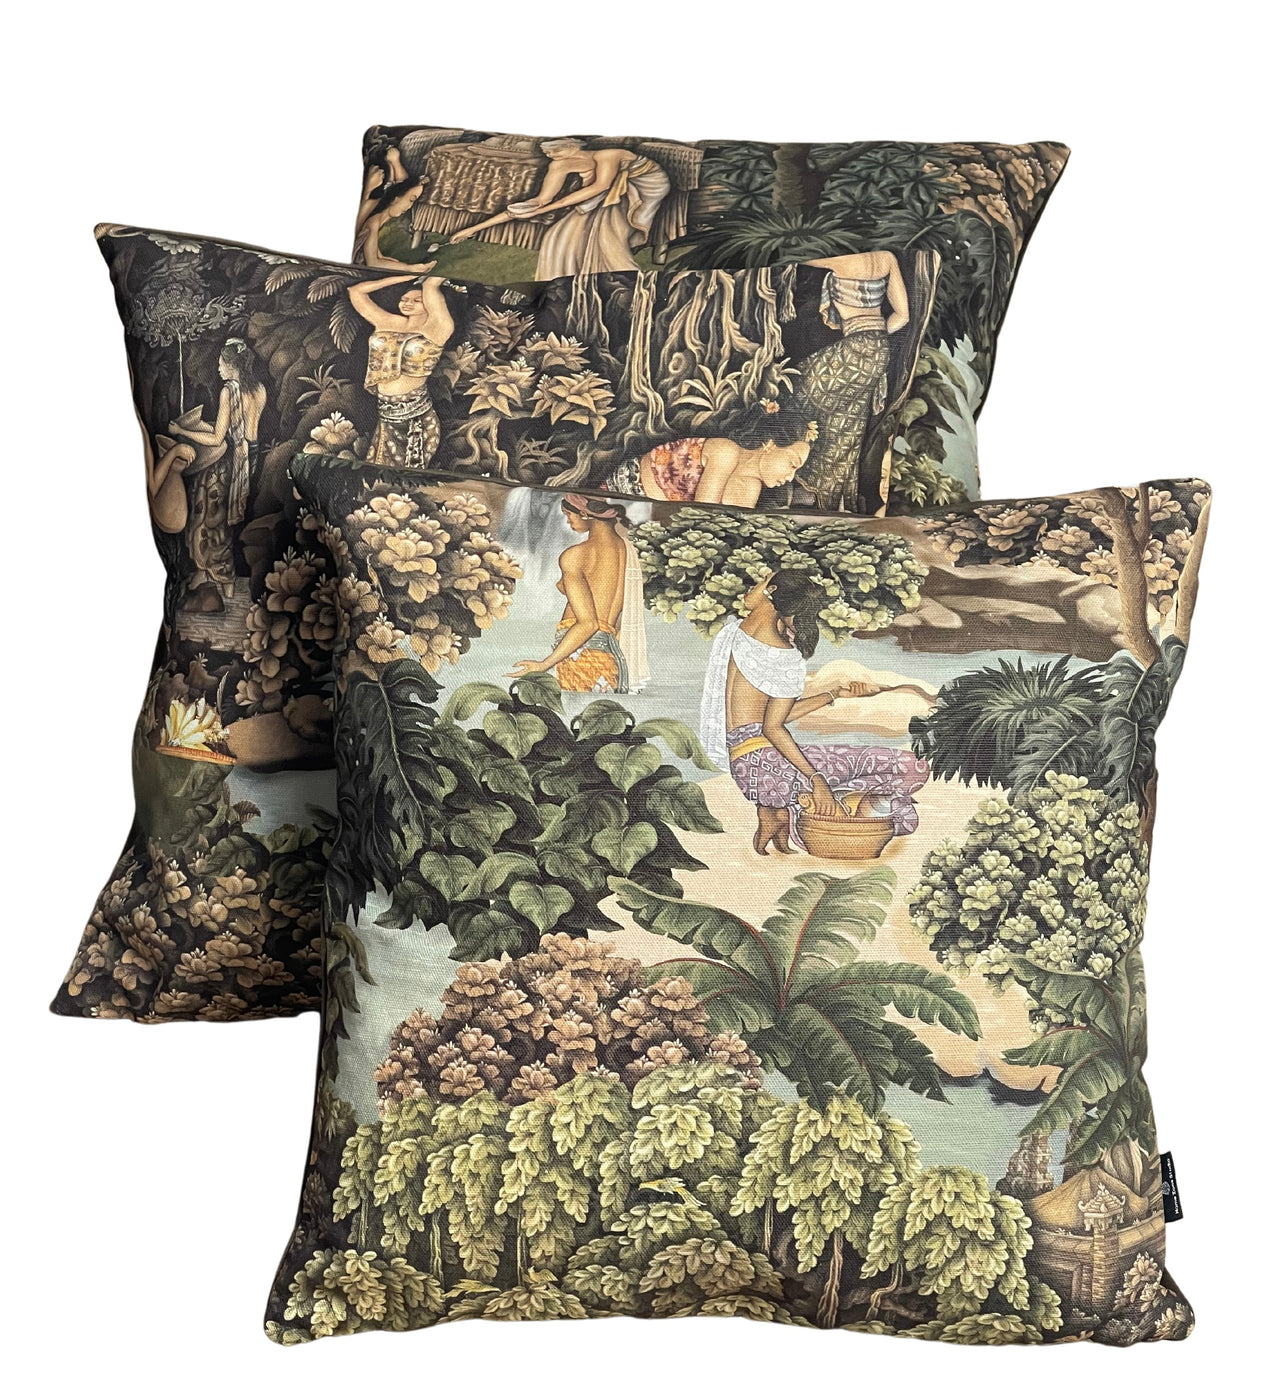 Glimpses of Paradise / Botanical Cushion Cover / Thailand's Exotic Forest Waterfalls and Fruit Gatherers